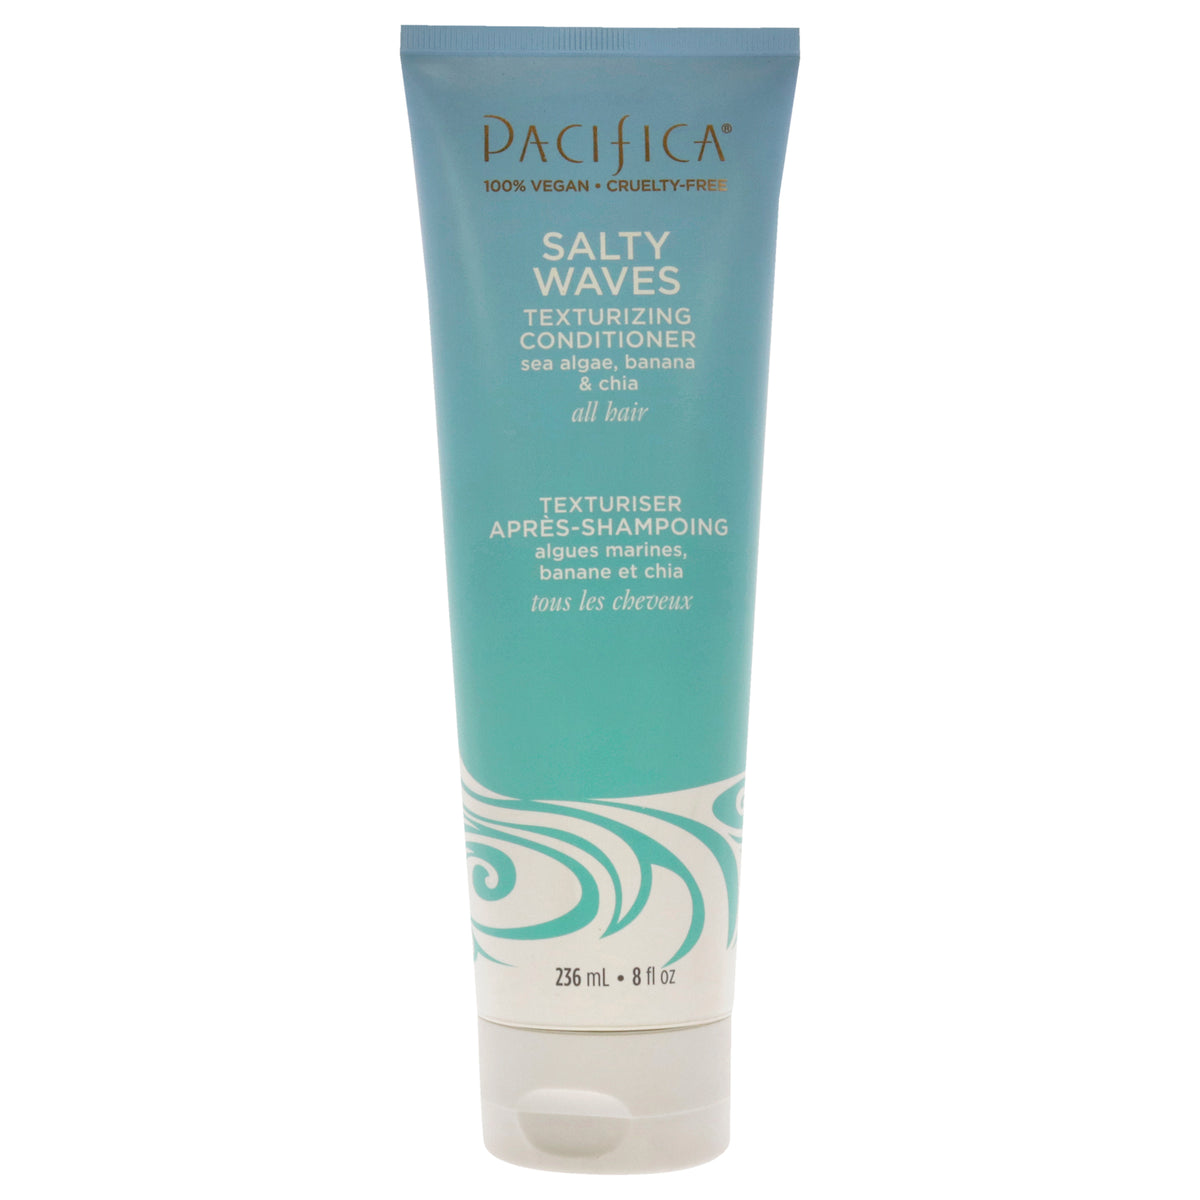 Salty Waves Texturizing Conditioner by Pacifica for Women